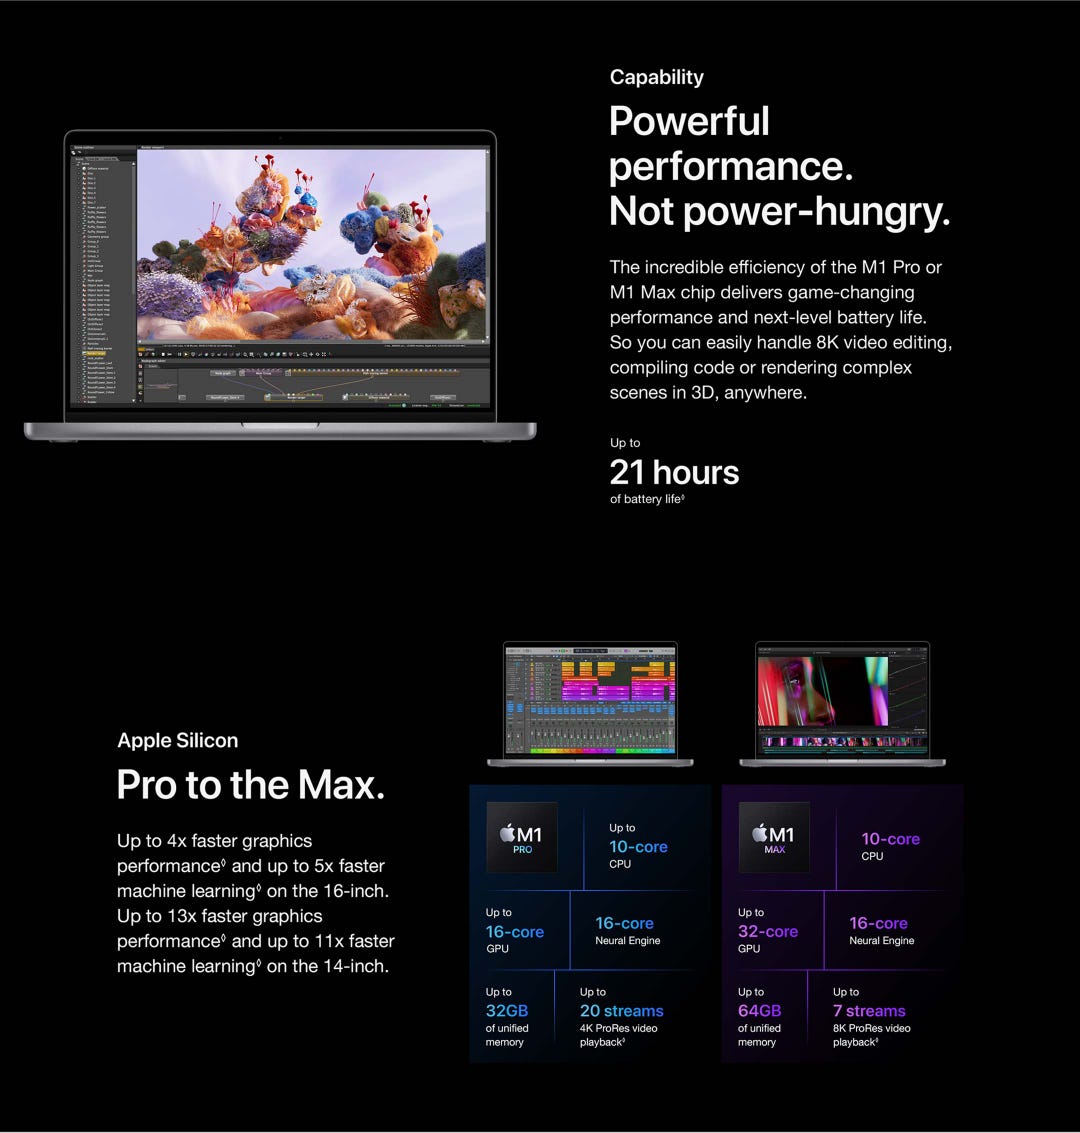 Capability. Powerful performance. Not power-hungry. The incredible efficiency of the M1 Pro or M1 Max chip delivers game-changing performance and next-level battery life.So you can easily handle 8K video editing, compiling code or rendering complex scenes in 3D, anywhere. Up to 21 hours of battery life◊. Apple Silicon. Pro to the Max. Up to 4x faster graphicsperformance◊ and up to 5x faster machine learning◊ on the 16-inch. Up to 13x faster graphics performance◊ and up to 11x faster machine learning◊ on the 14-inch.